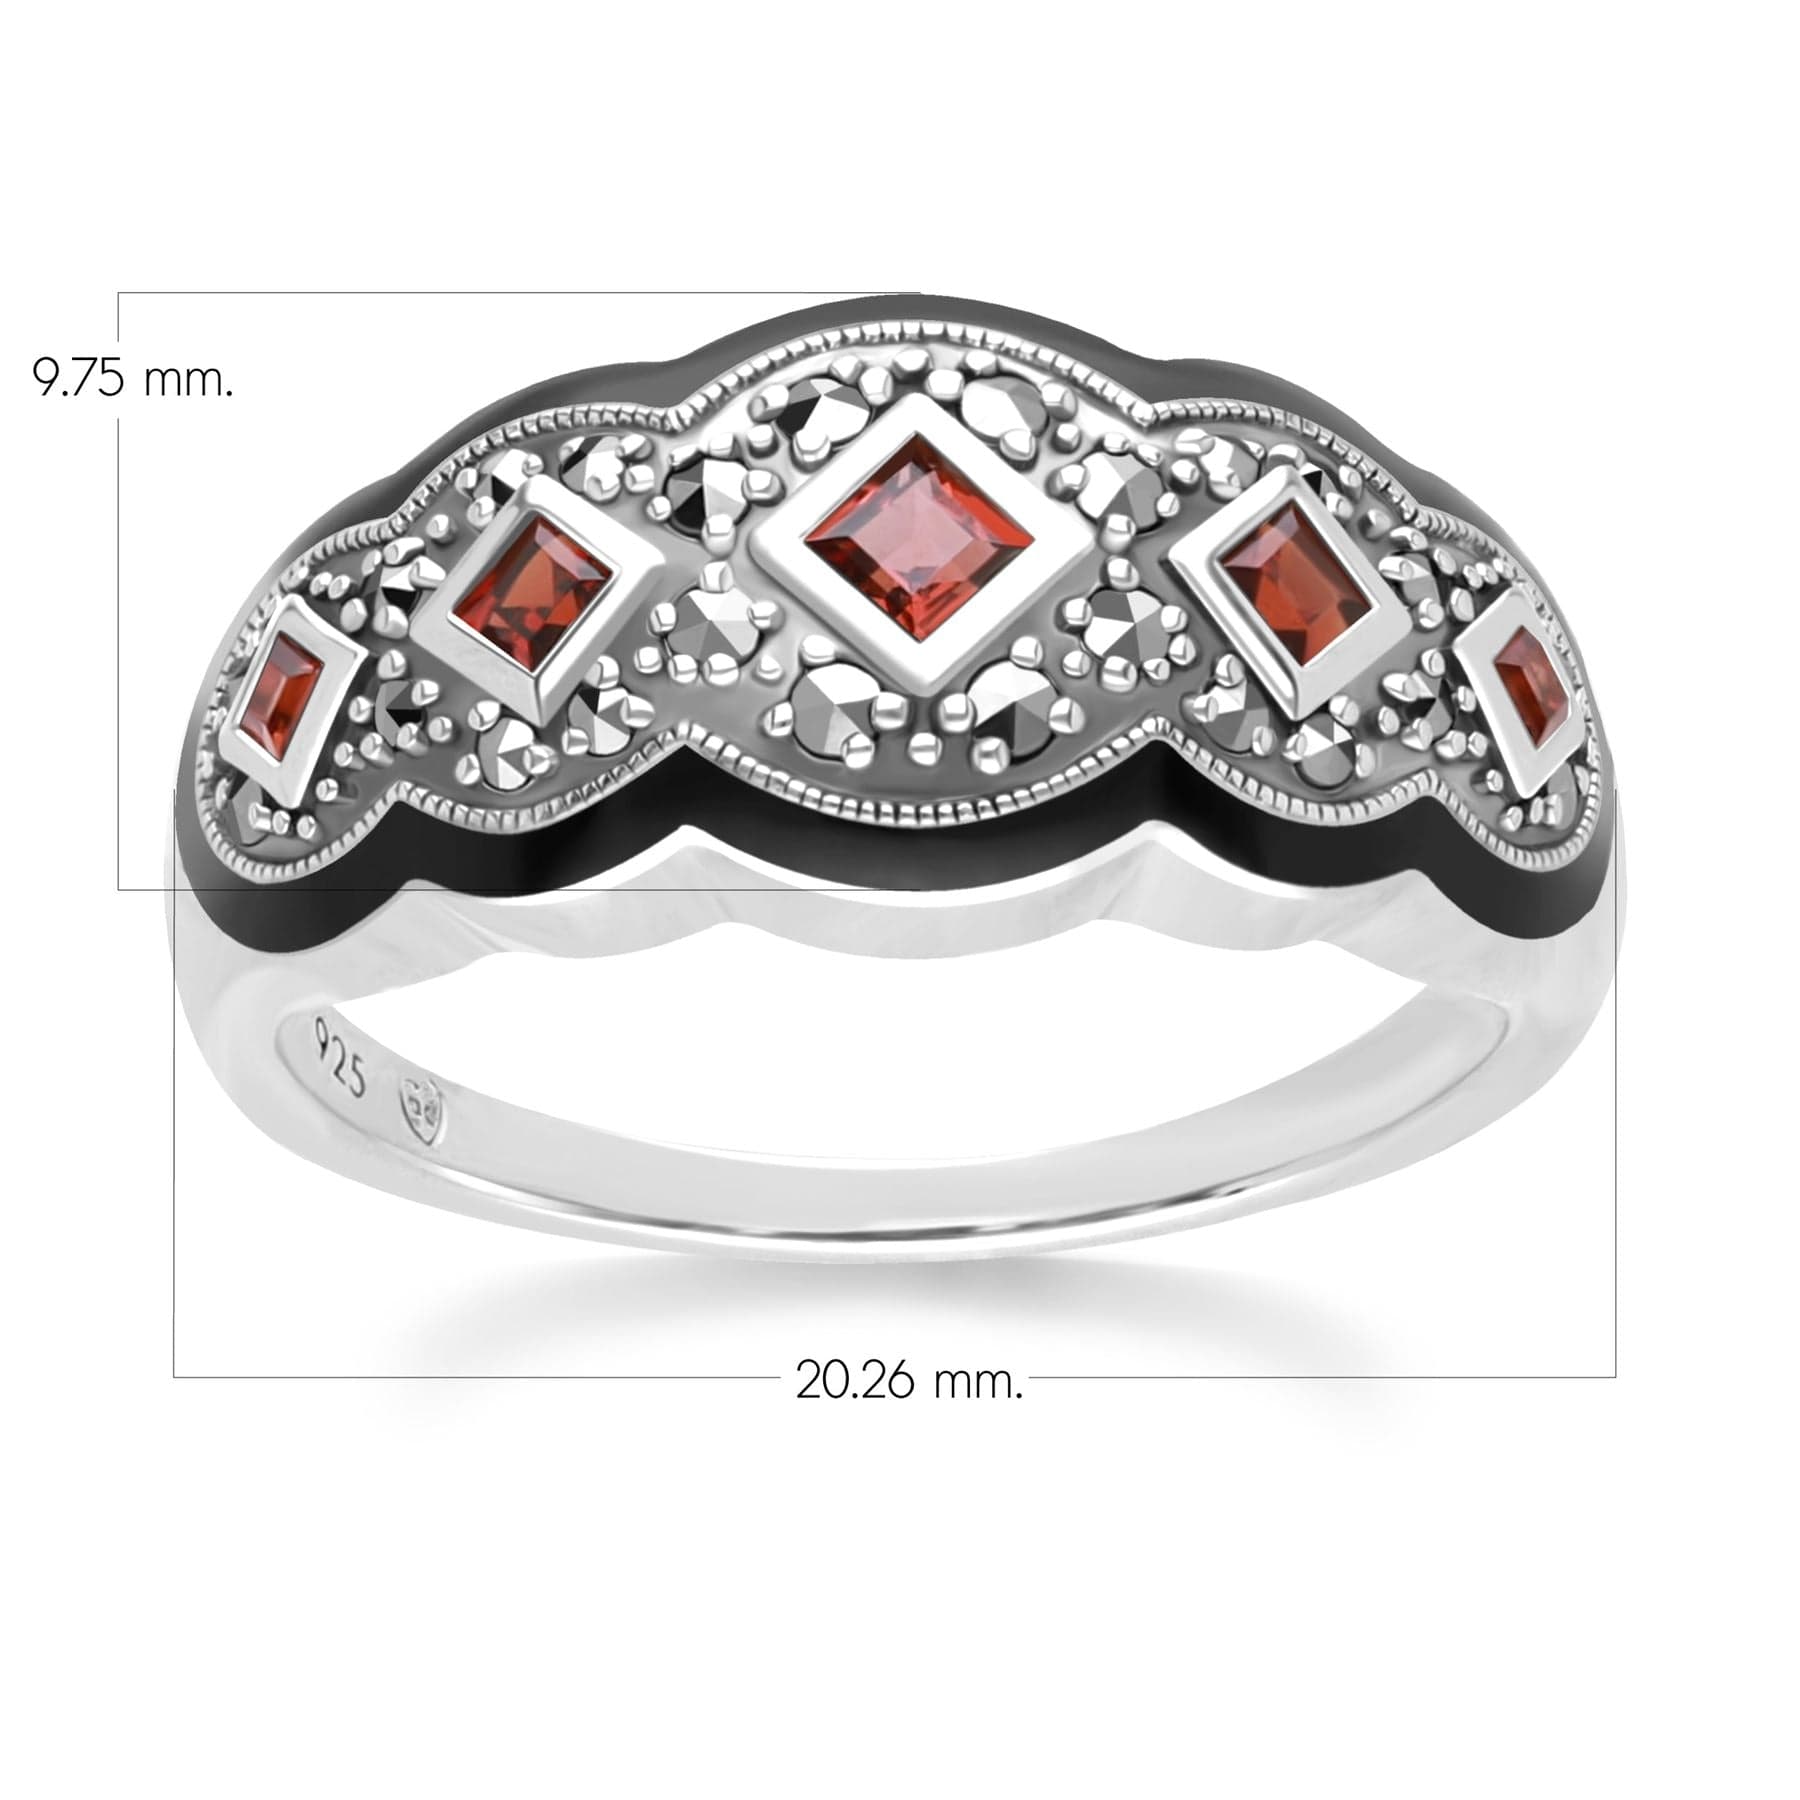 Art Deco Style Square Garnet Five Stone and Marcasite Ring in Sterling Silver 214R642101925 Dimensions